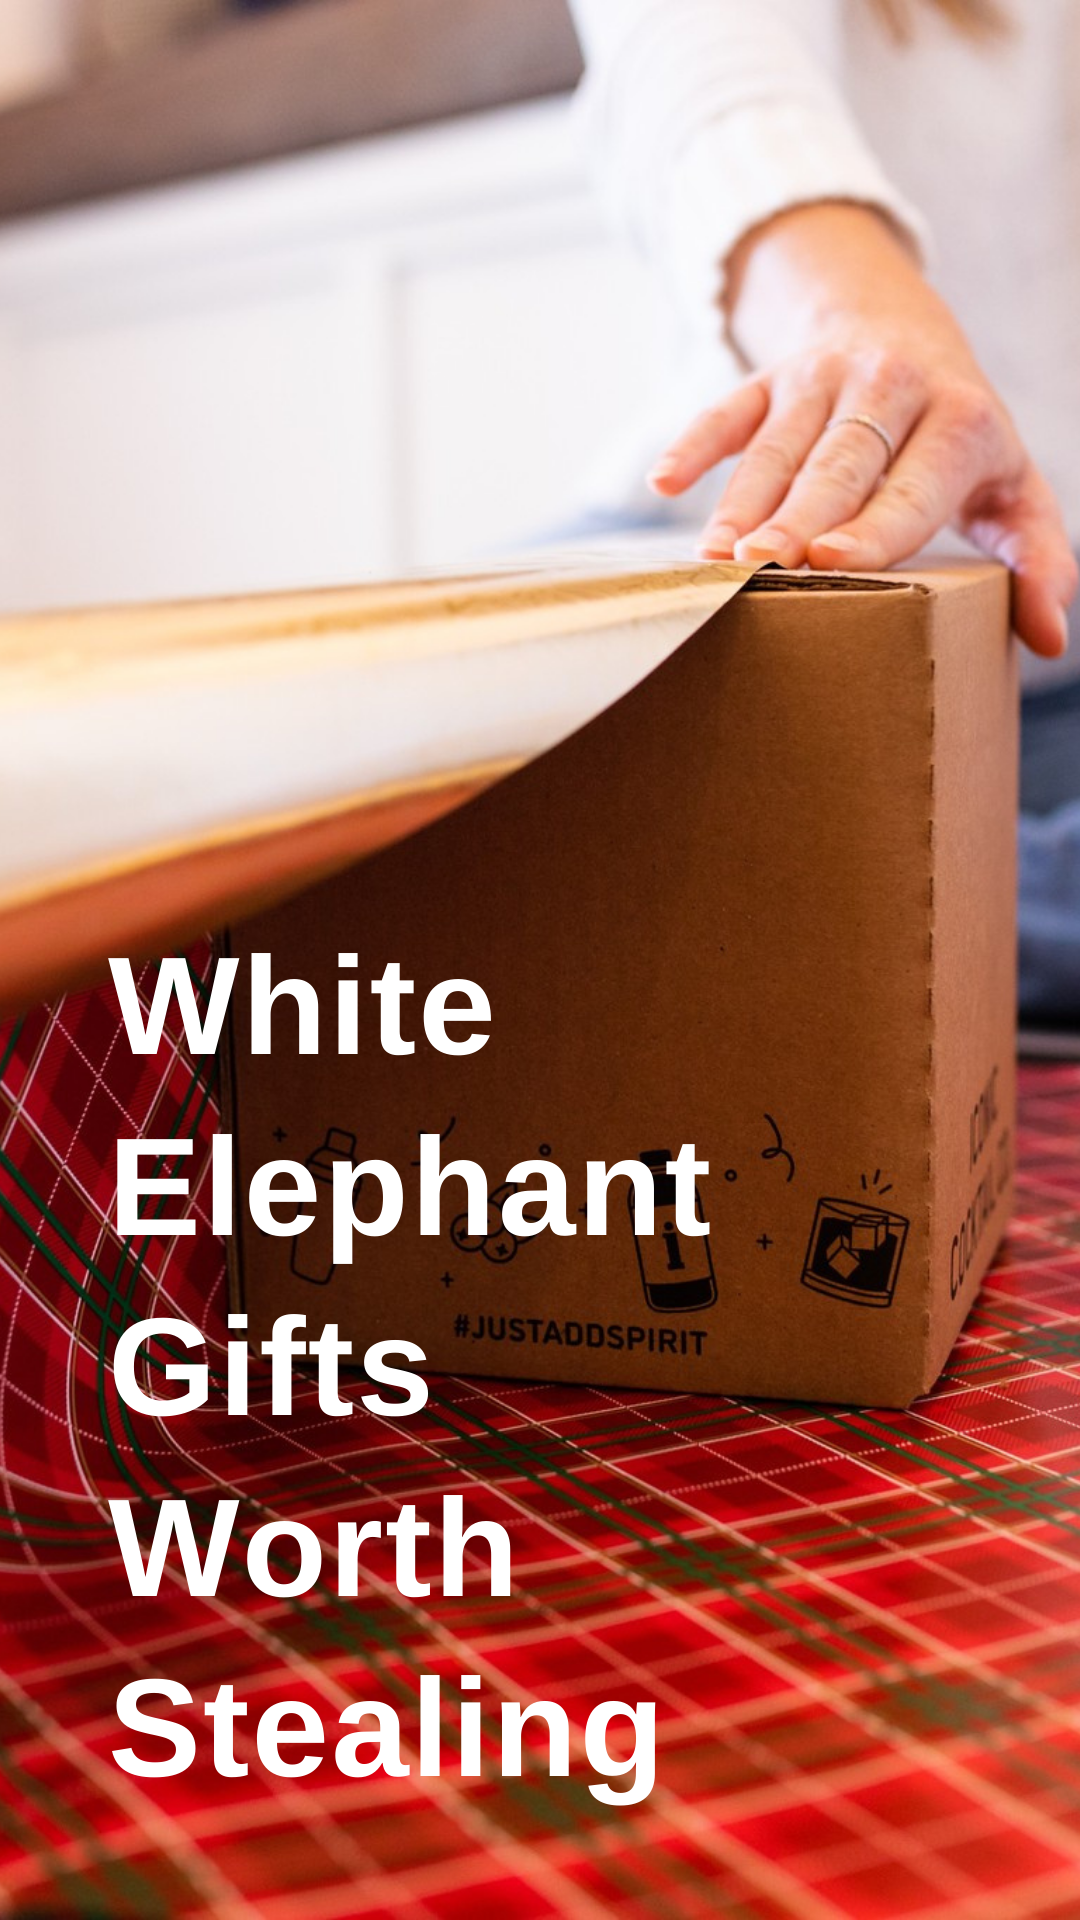 Unique and Affordable White Elephant Gift Ideas